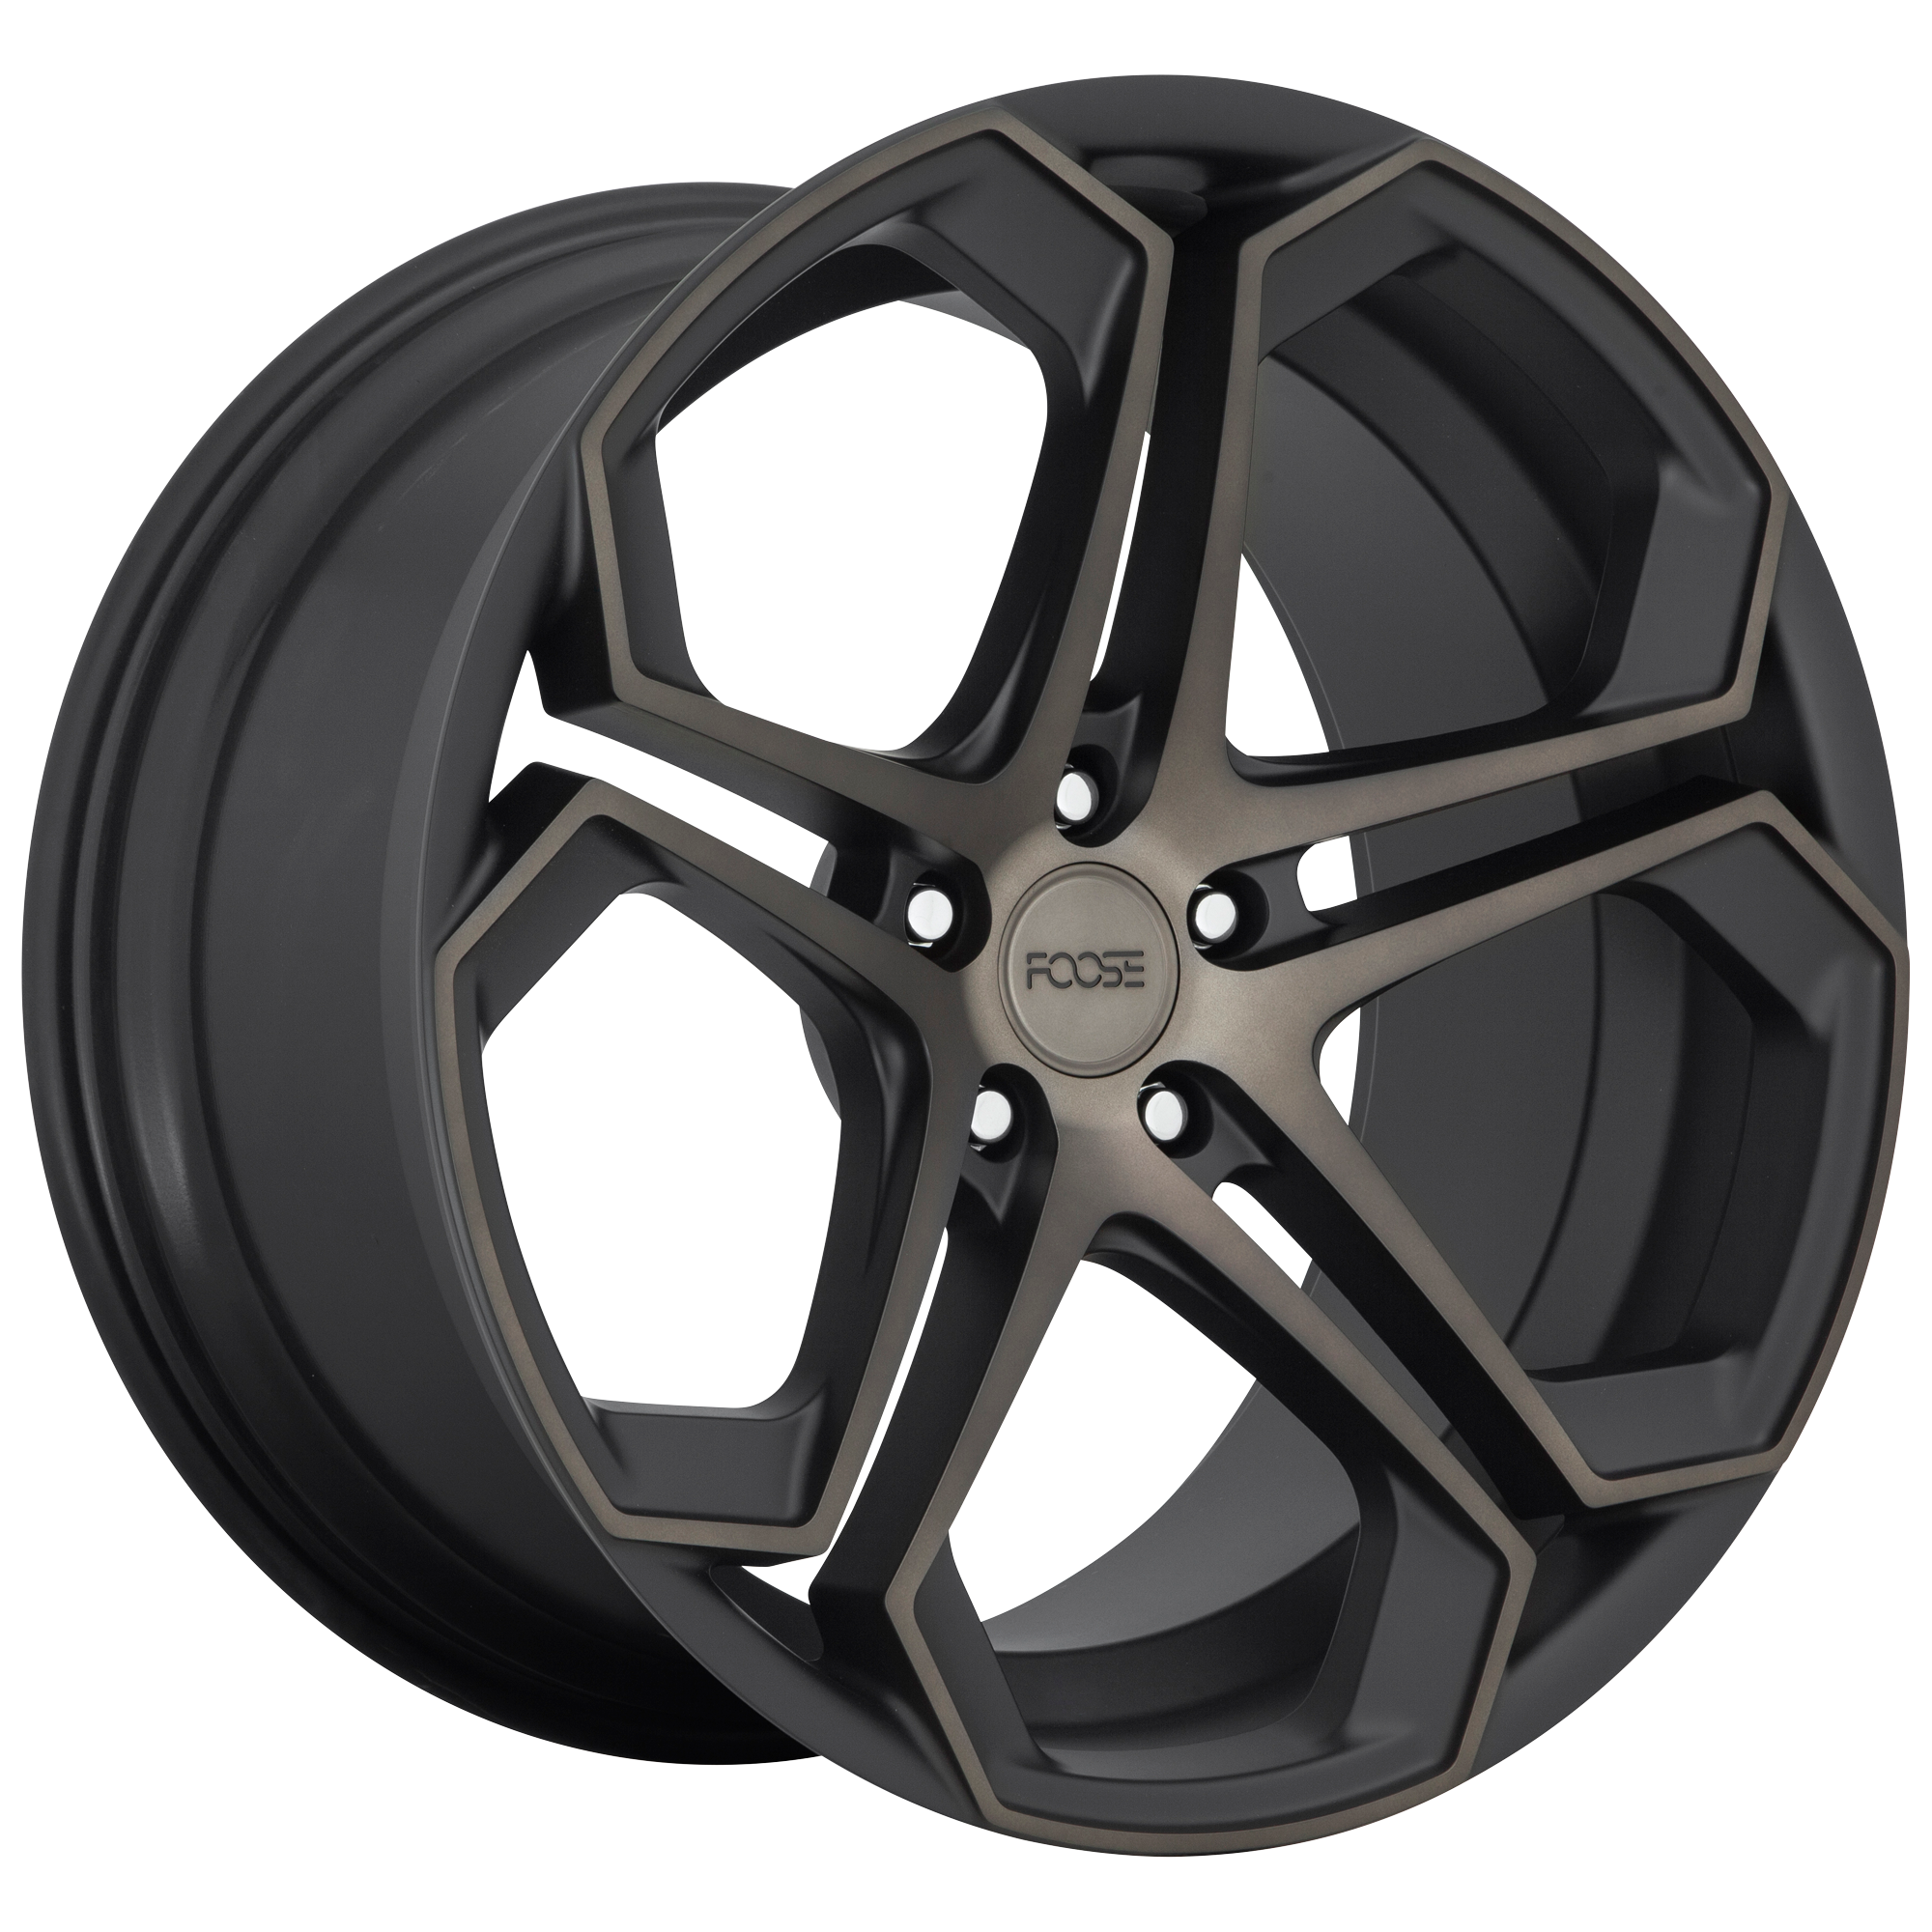 IMPALA 20x9 5x115.00 MATTE MACHINED DOUBLE DARK TINT (38 mm) - Tires and Engine Performance